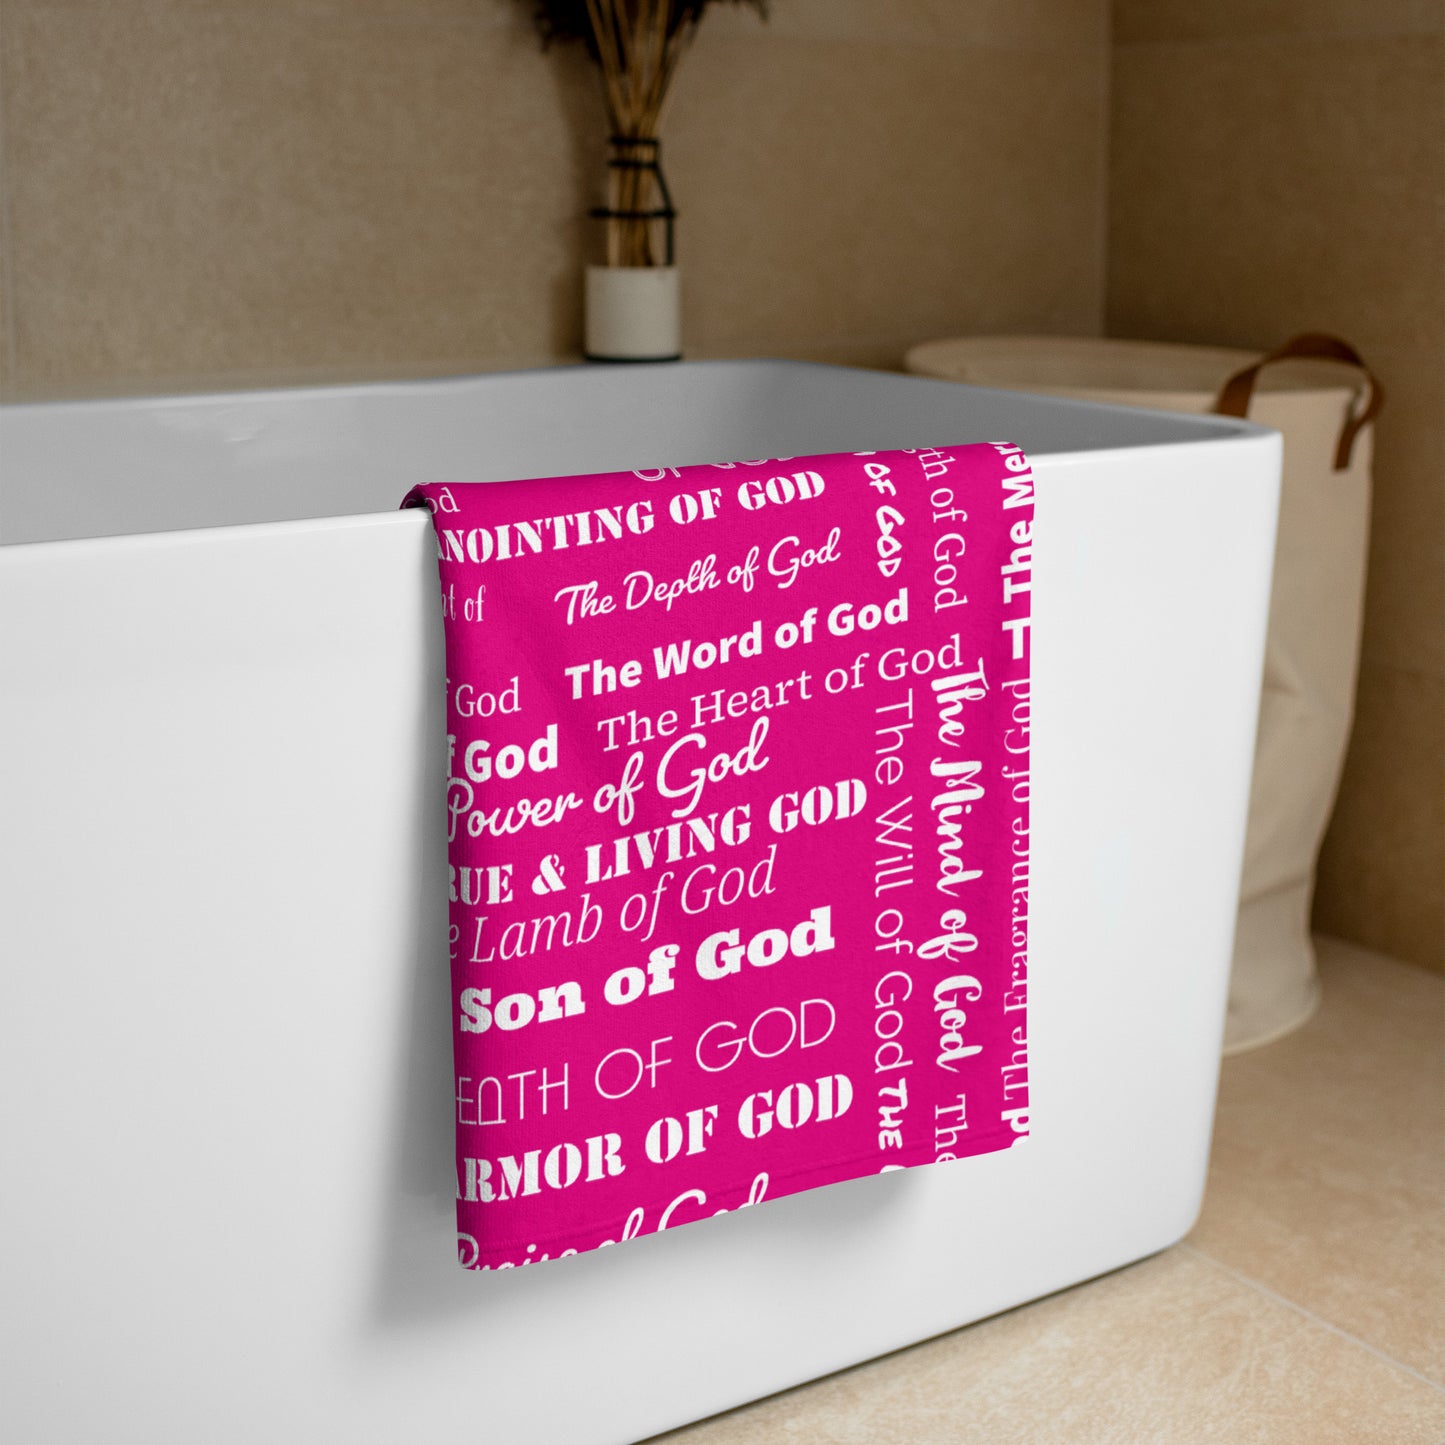 Attributes of God Towel - Hot Pink/White